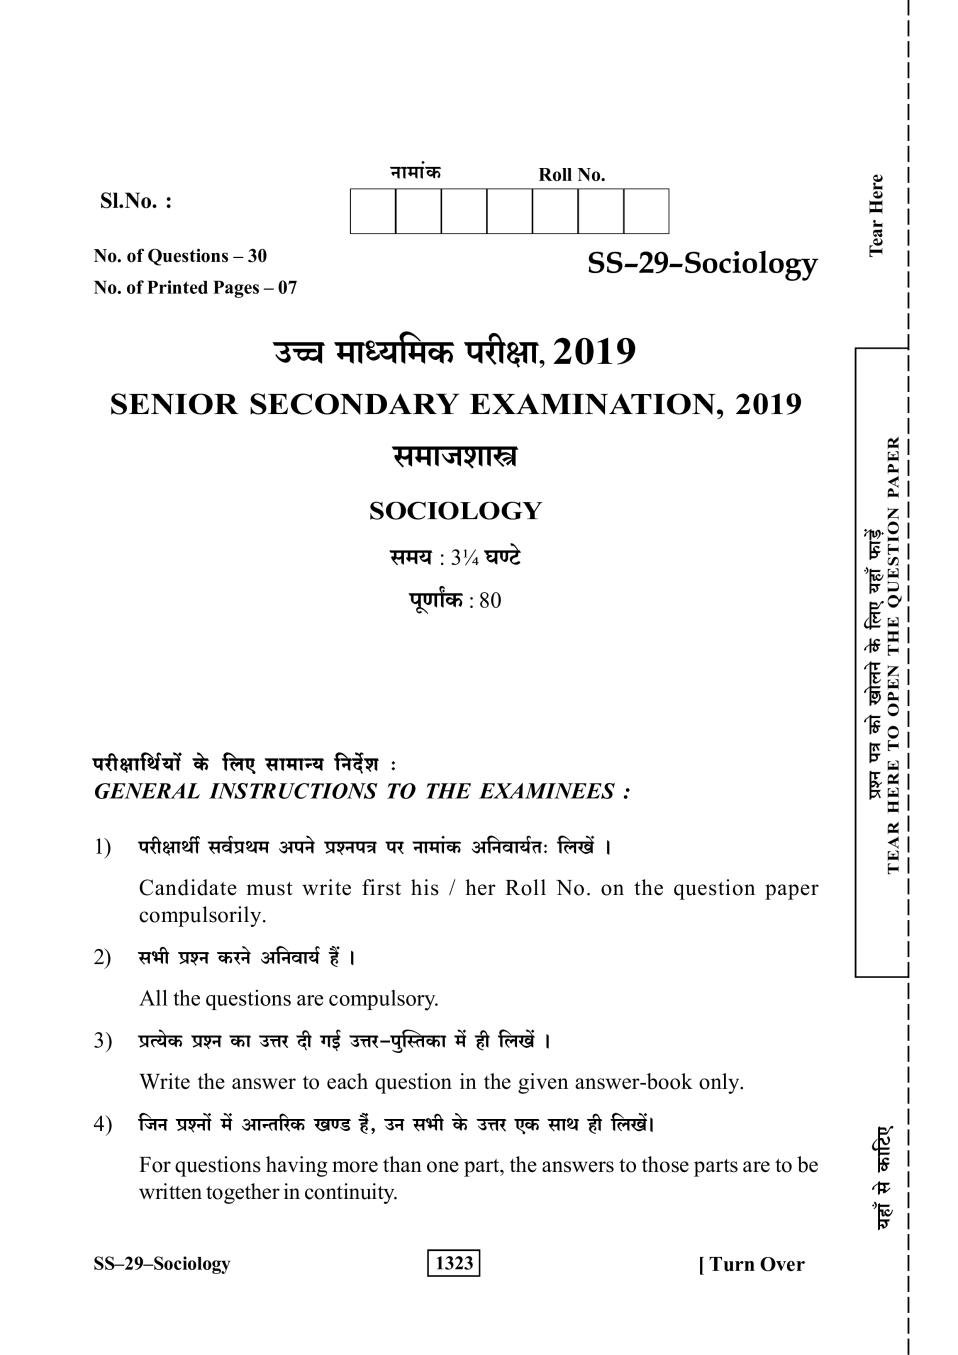 Rajasthan Board 12th Class Sociology Question Paper 2019 - Page 1